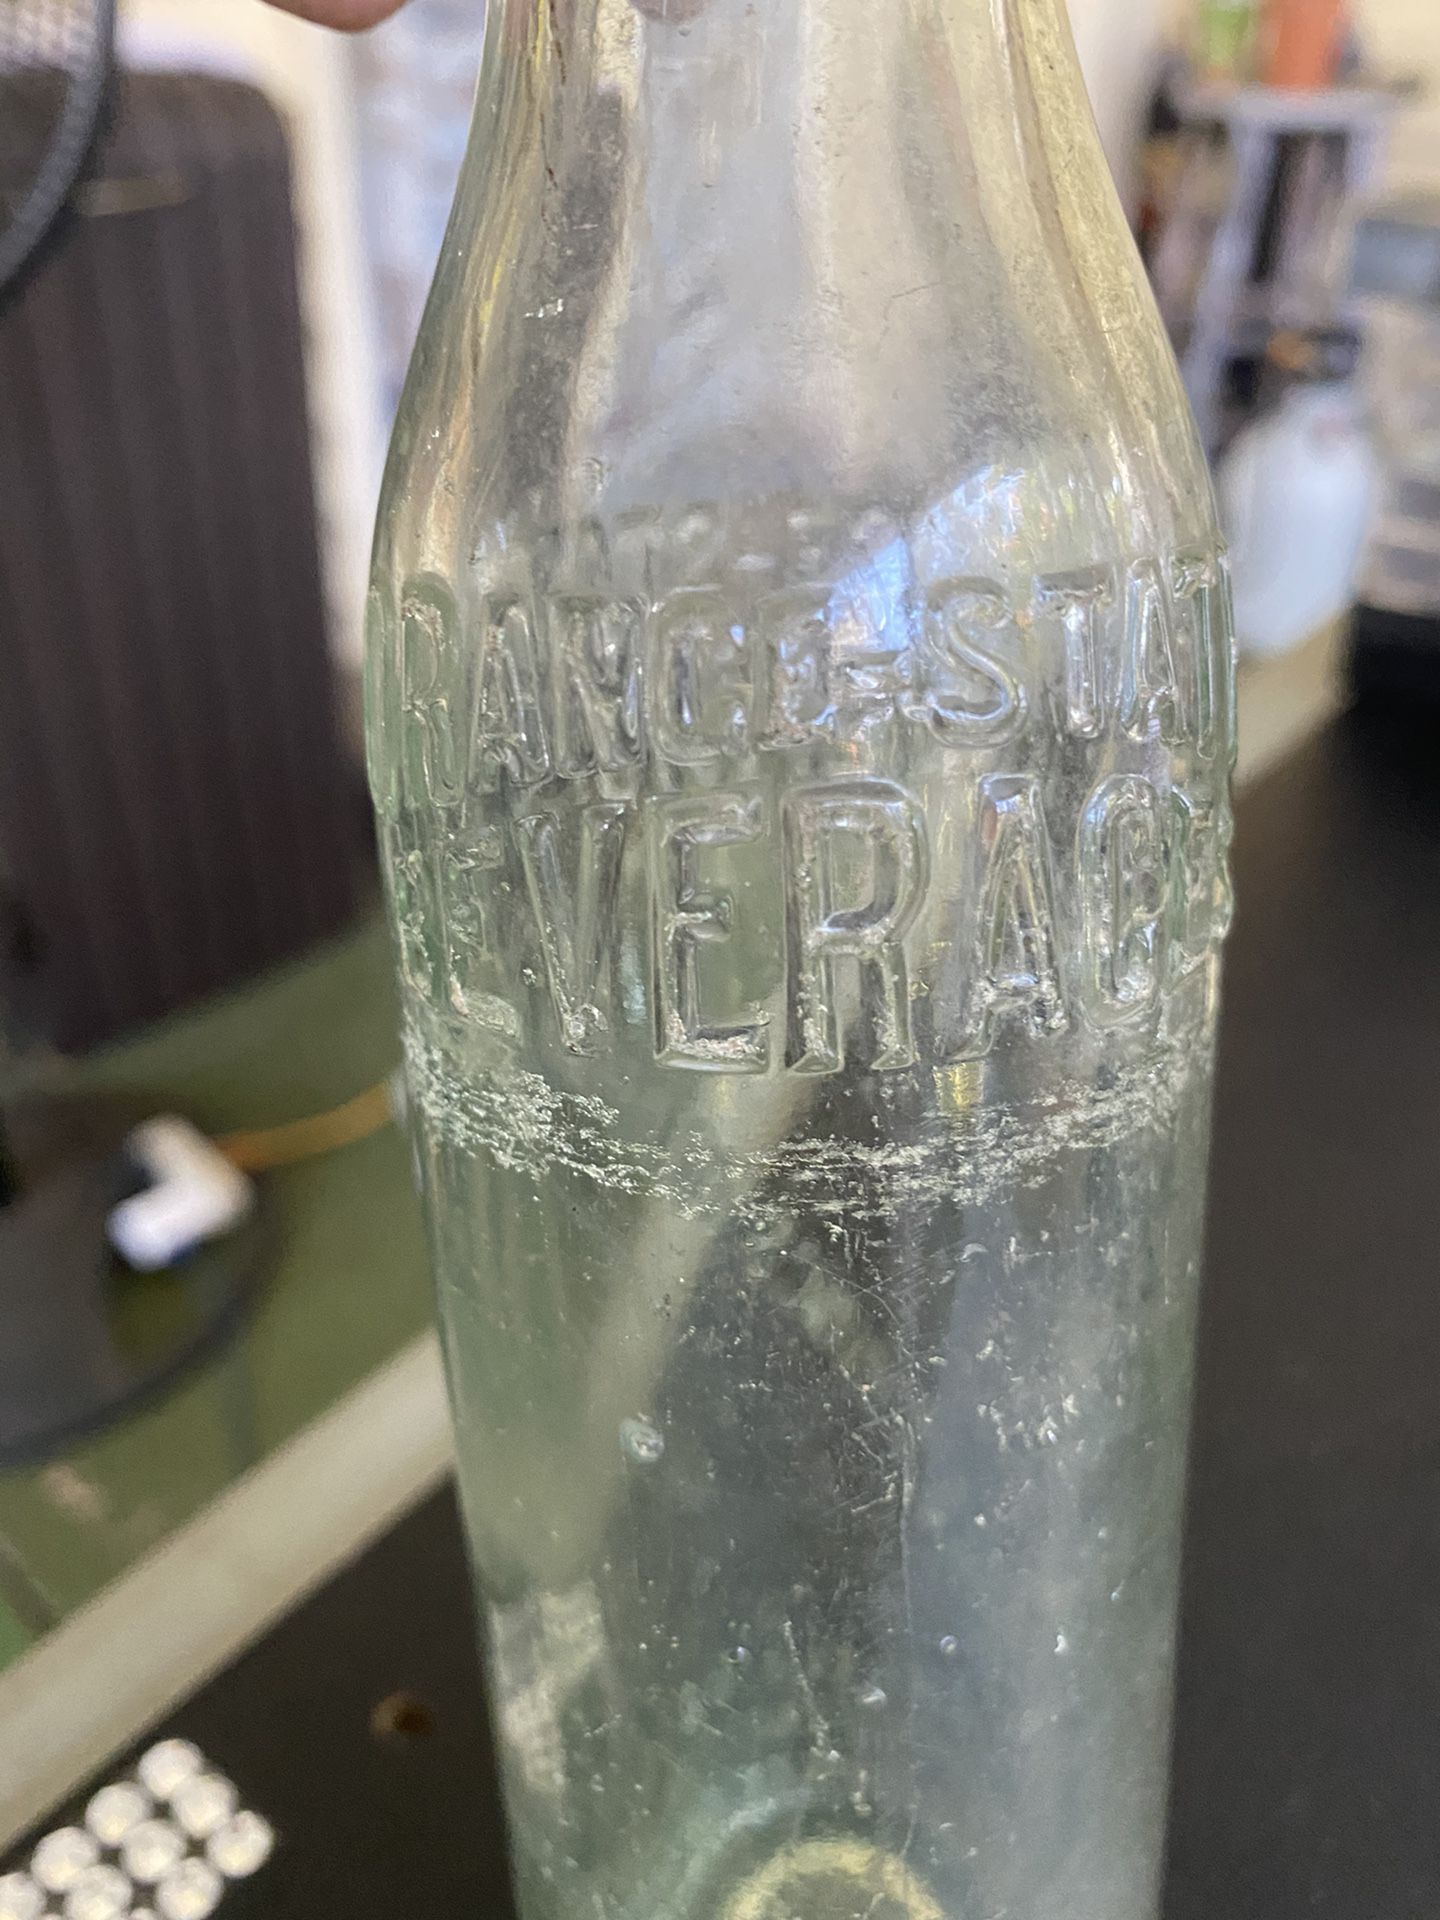 Antique bottle: Orange State Beverage Co. 6.5 ounce bottle. Made in Bradentown ( now named Bradenton ) Fl. Made prior to name change which took place 